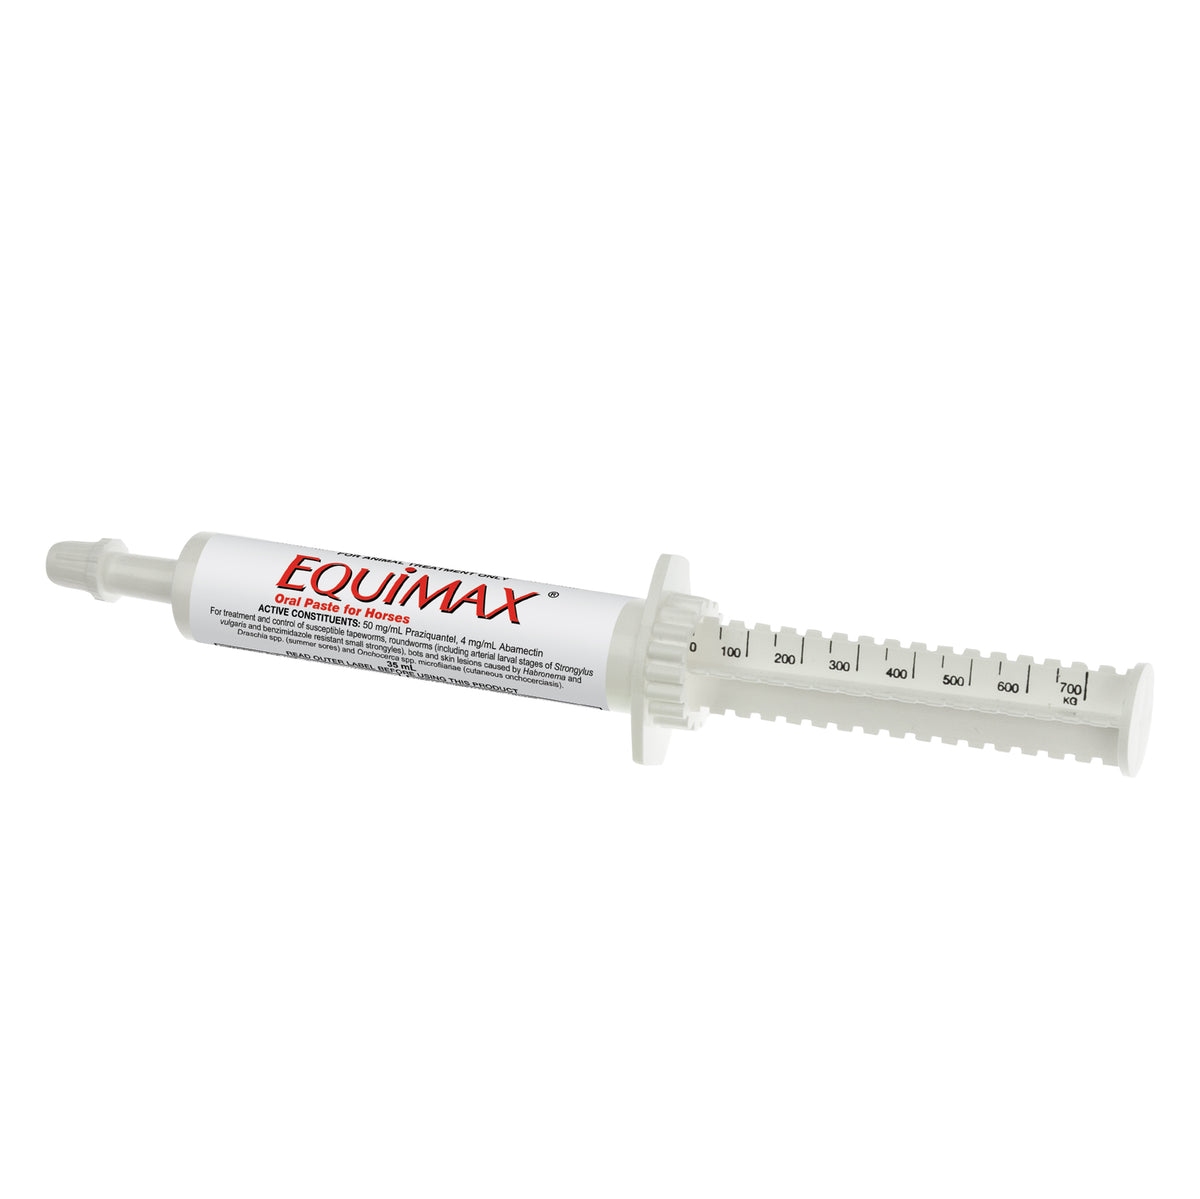 Equimax Oral Paste for Horses - Stable Pail 60 syringes